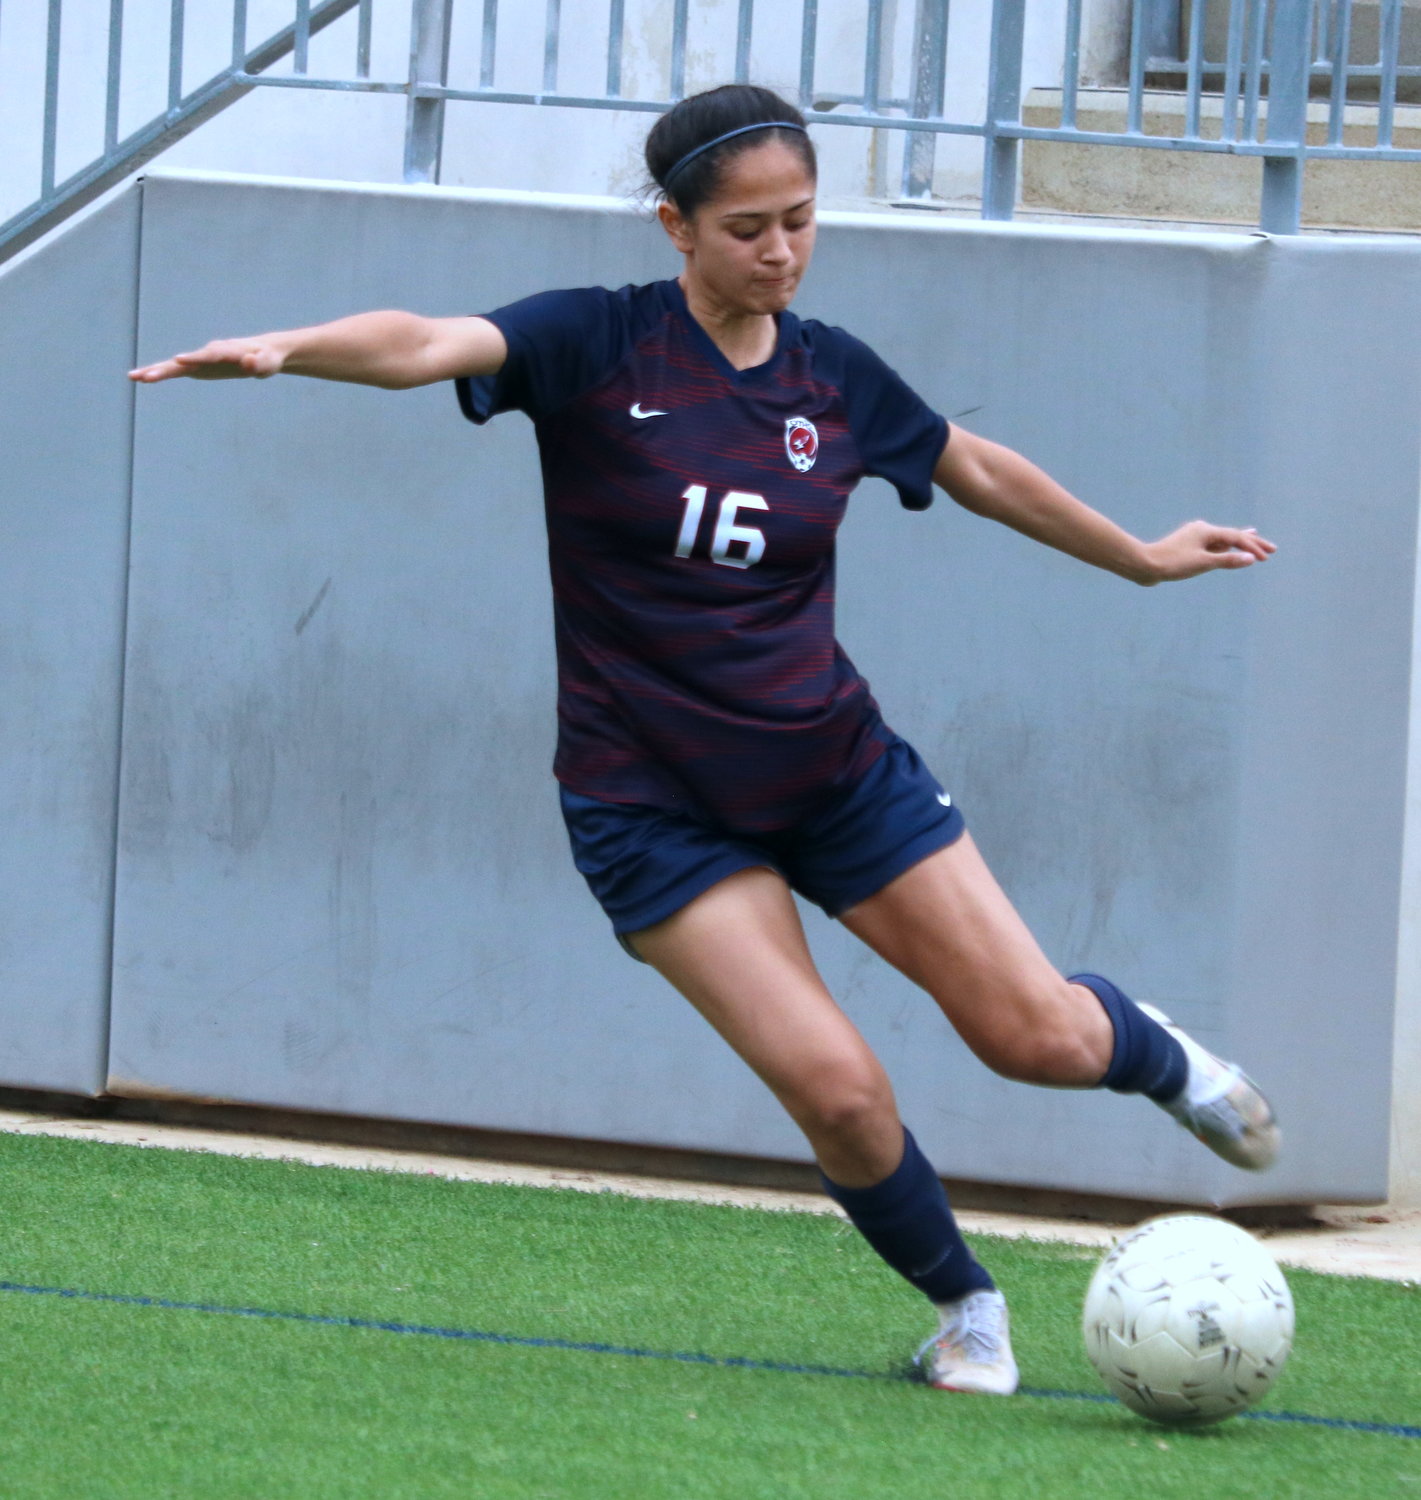 Rosa Reyes crosses the ball during Tuesday’s Class 6A area round game between Tompkins and Bellaire at Legacy Stadium.